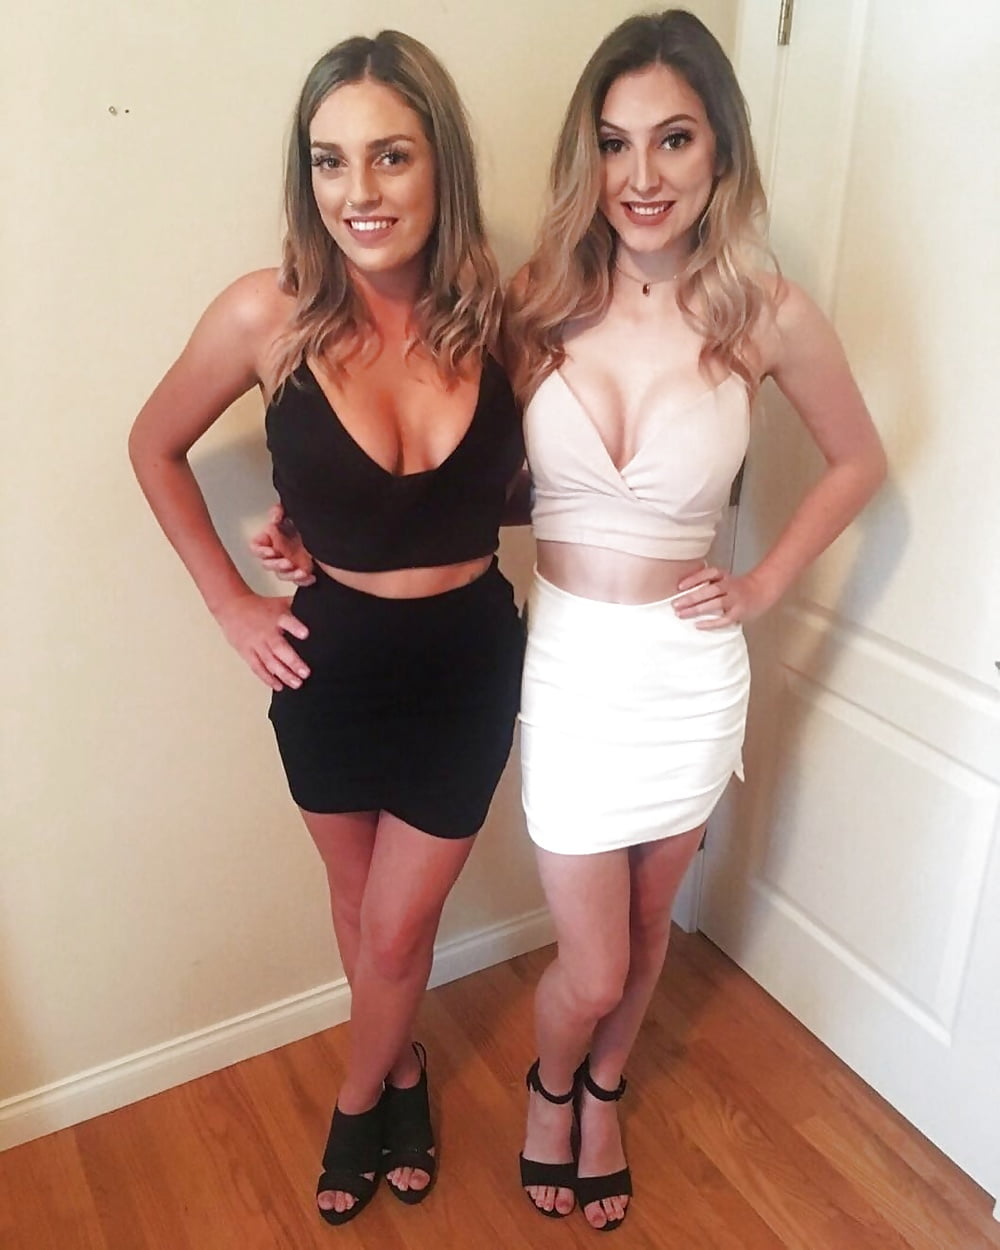 Which slut would you fuck and How? (12/13)